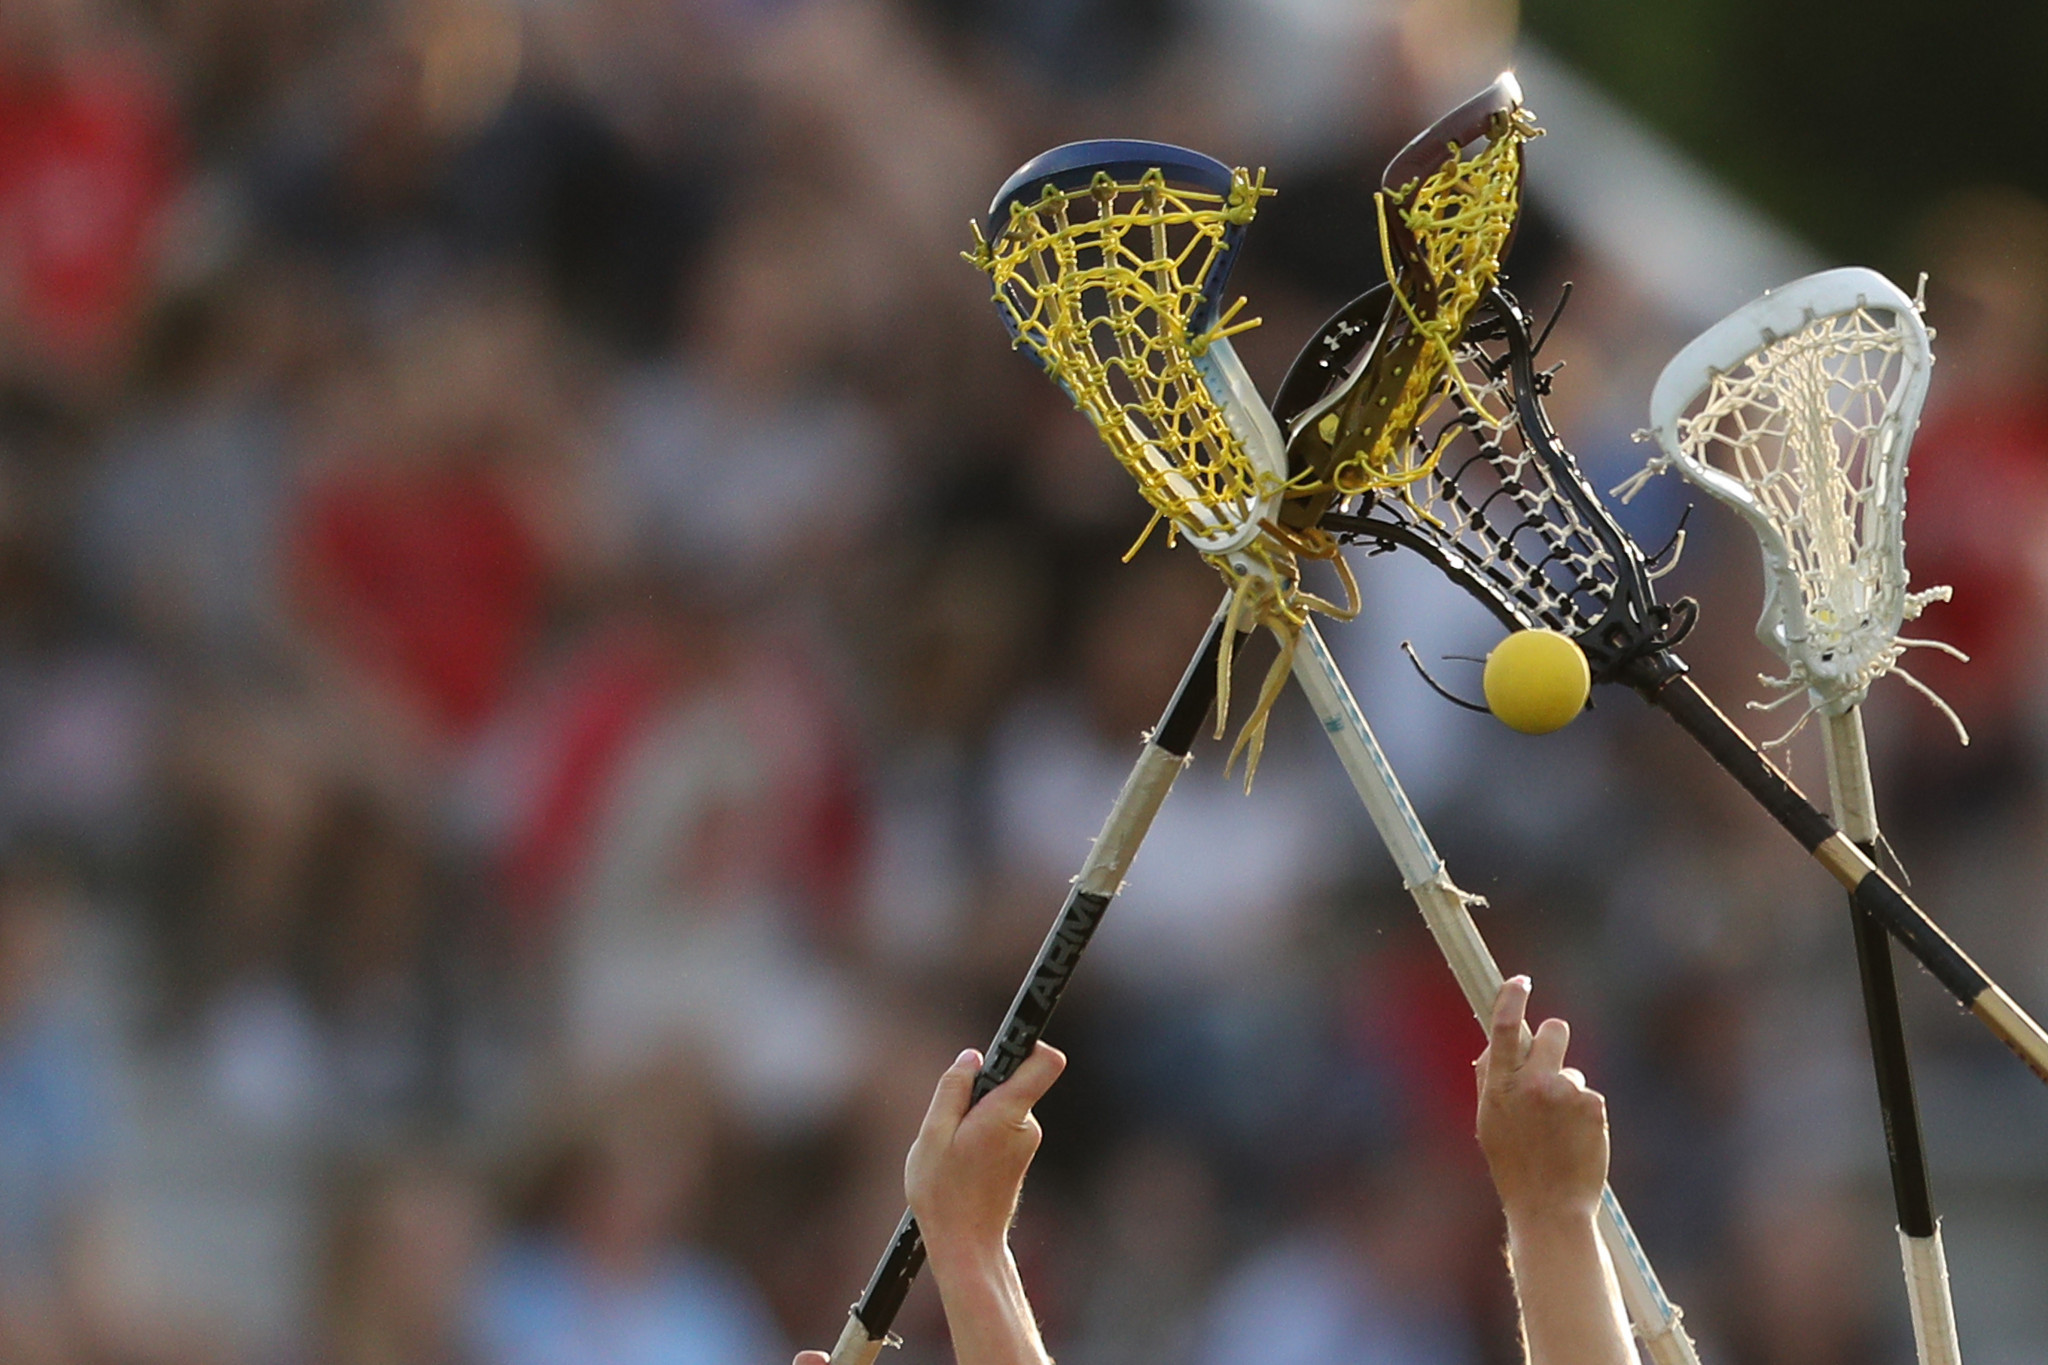 Schedule announced for World Lacrosse Men’s Championship in San Diego